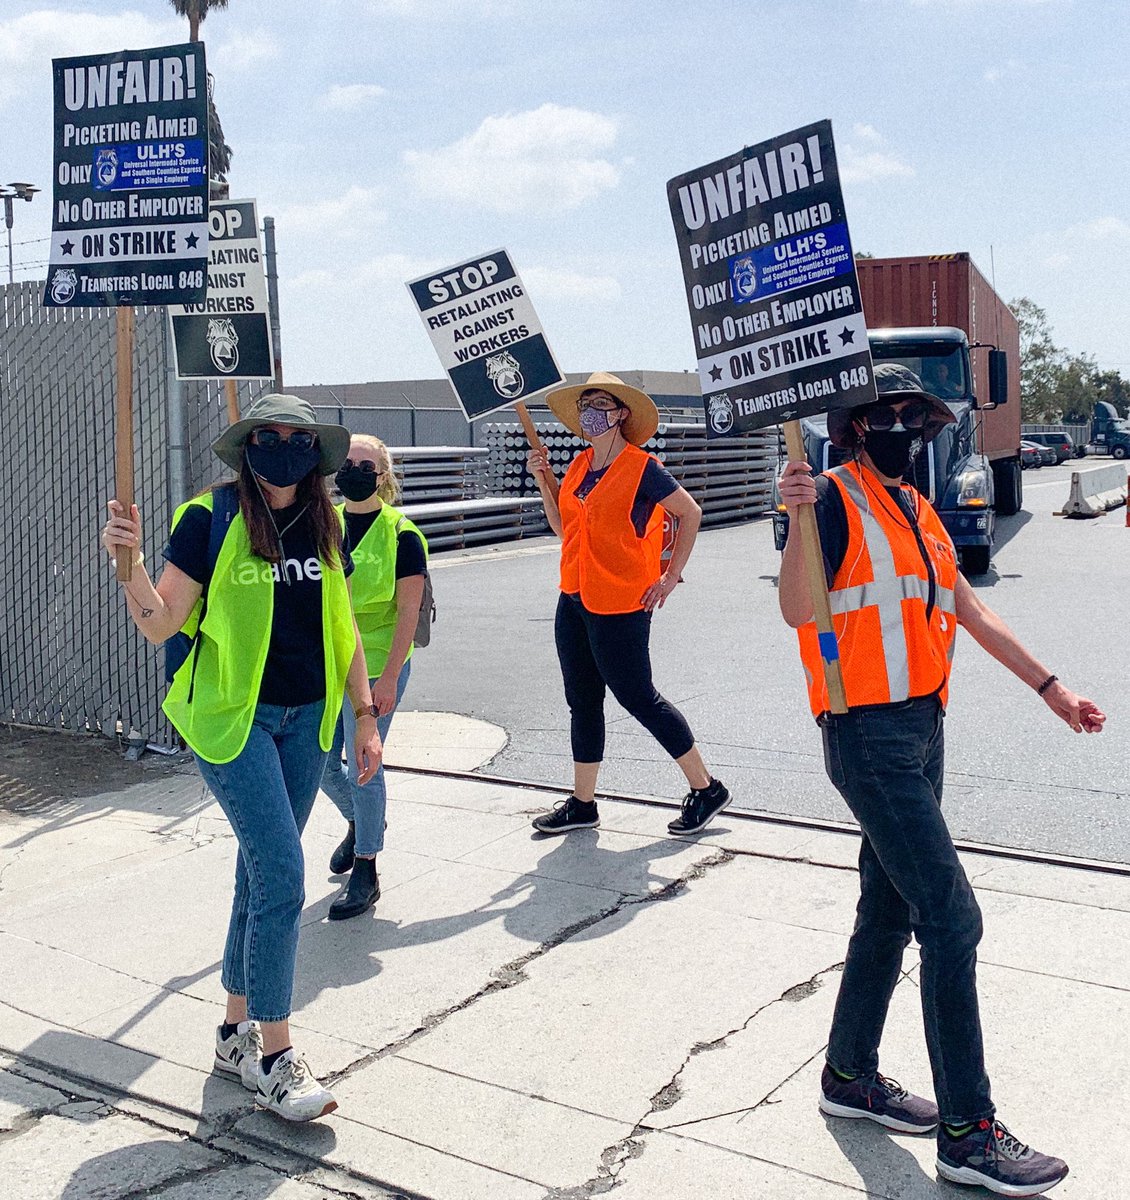 port  truck drivers at @drive4universal’s UIS are on STRIKE! they need to be reinstated, a fair contract + no misclassification as independent contractors. port trucking needs to be held accountable. i’m proud to stand with drivers + support #SB338 #SB700 + #AB794. #PortStrike